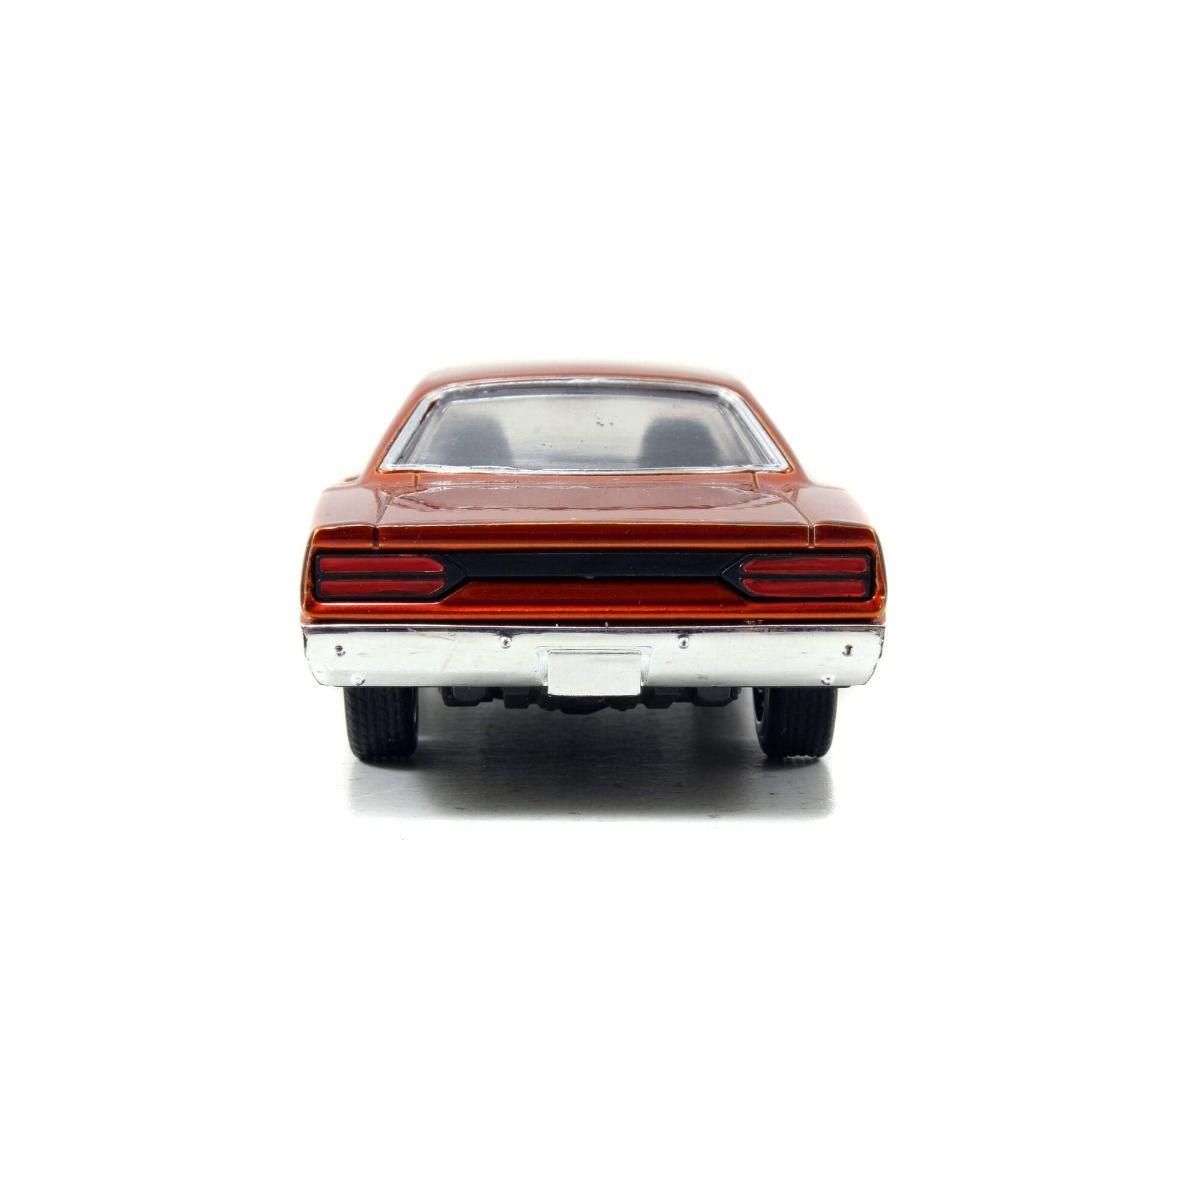 JAD97128 Fast and Furious - 1970 Plymouth Road Runner 1:32 Hollywood Ride - Jada Toys - Titan Pop Culture